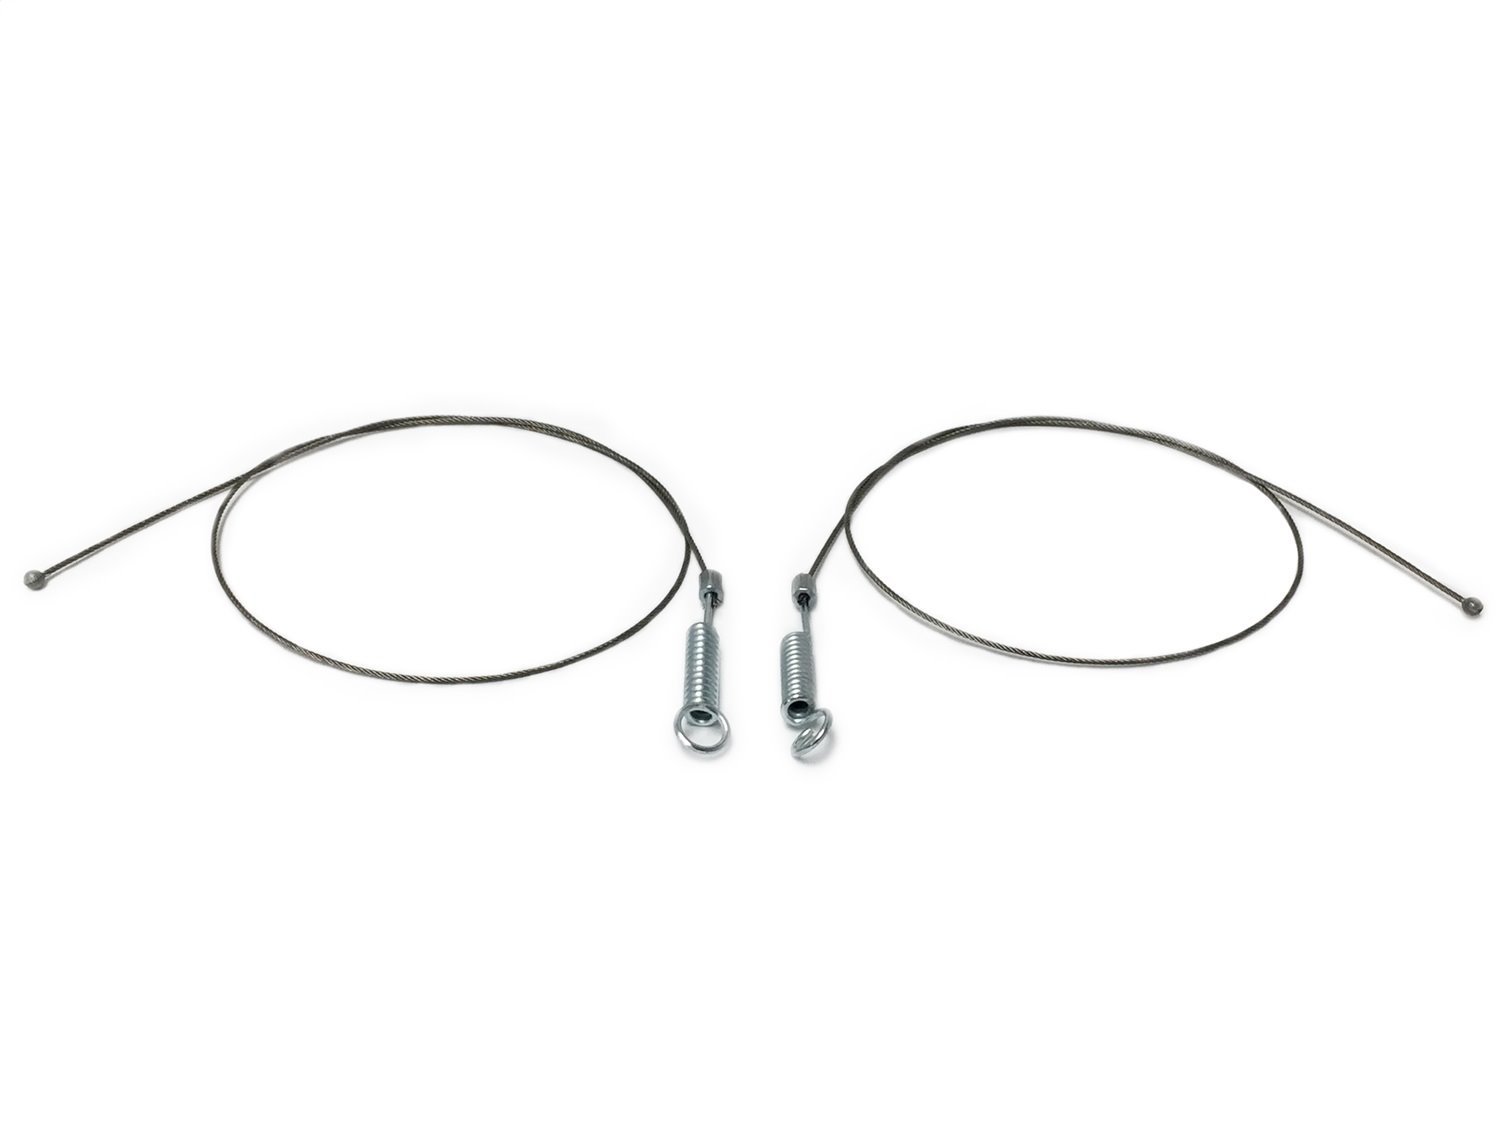 Convertible Top Release Cable Set